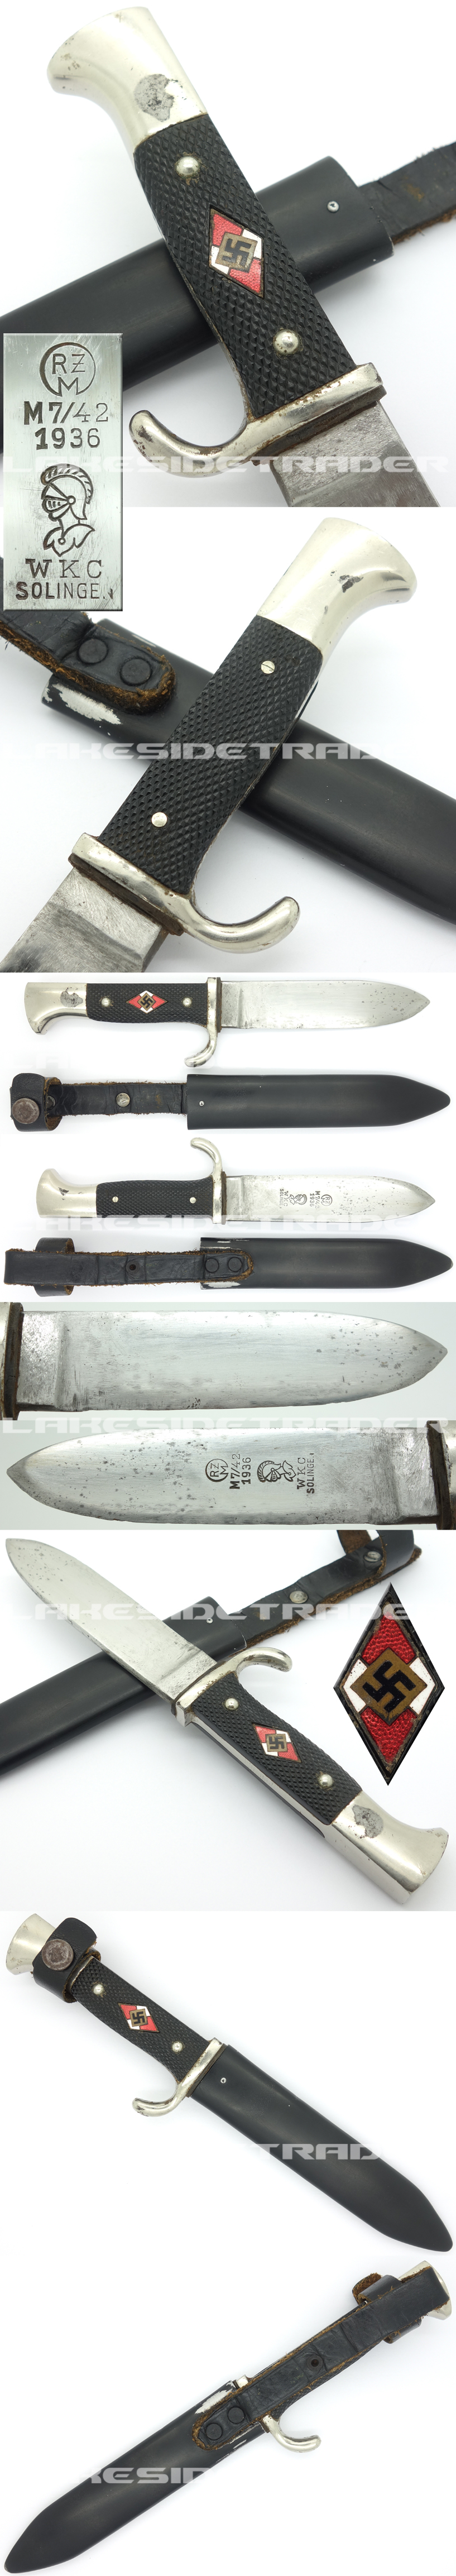 Hitler Youth Knife by WKC 1936